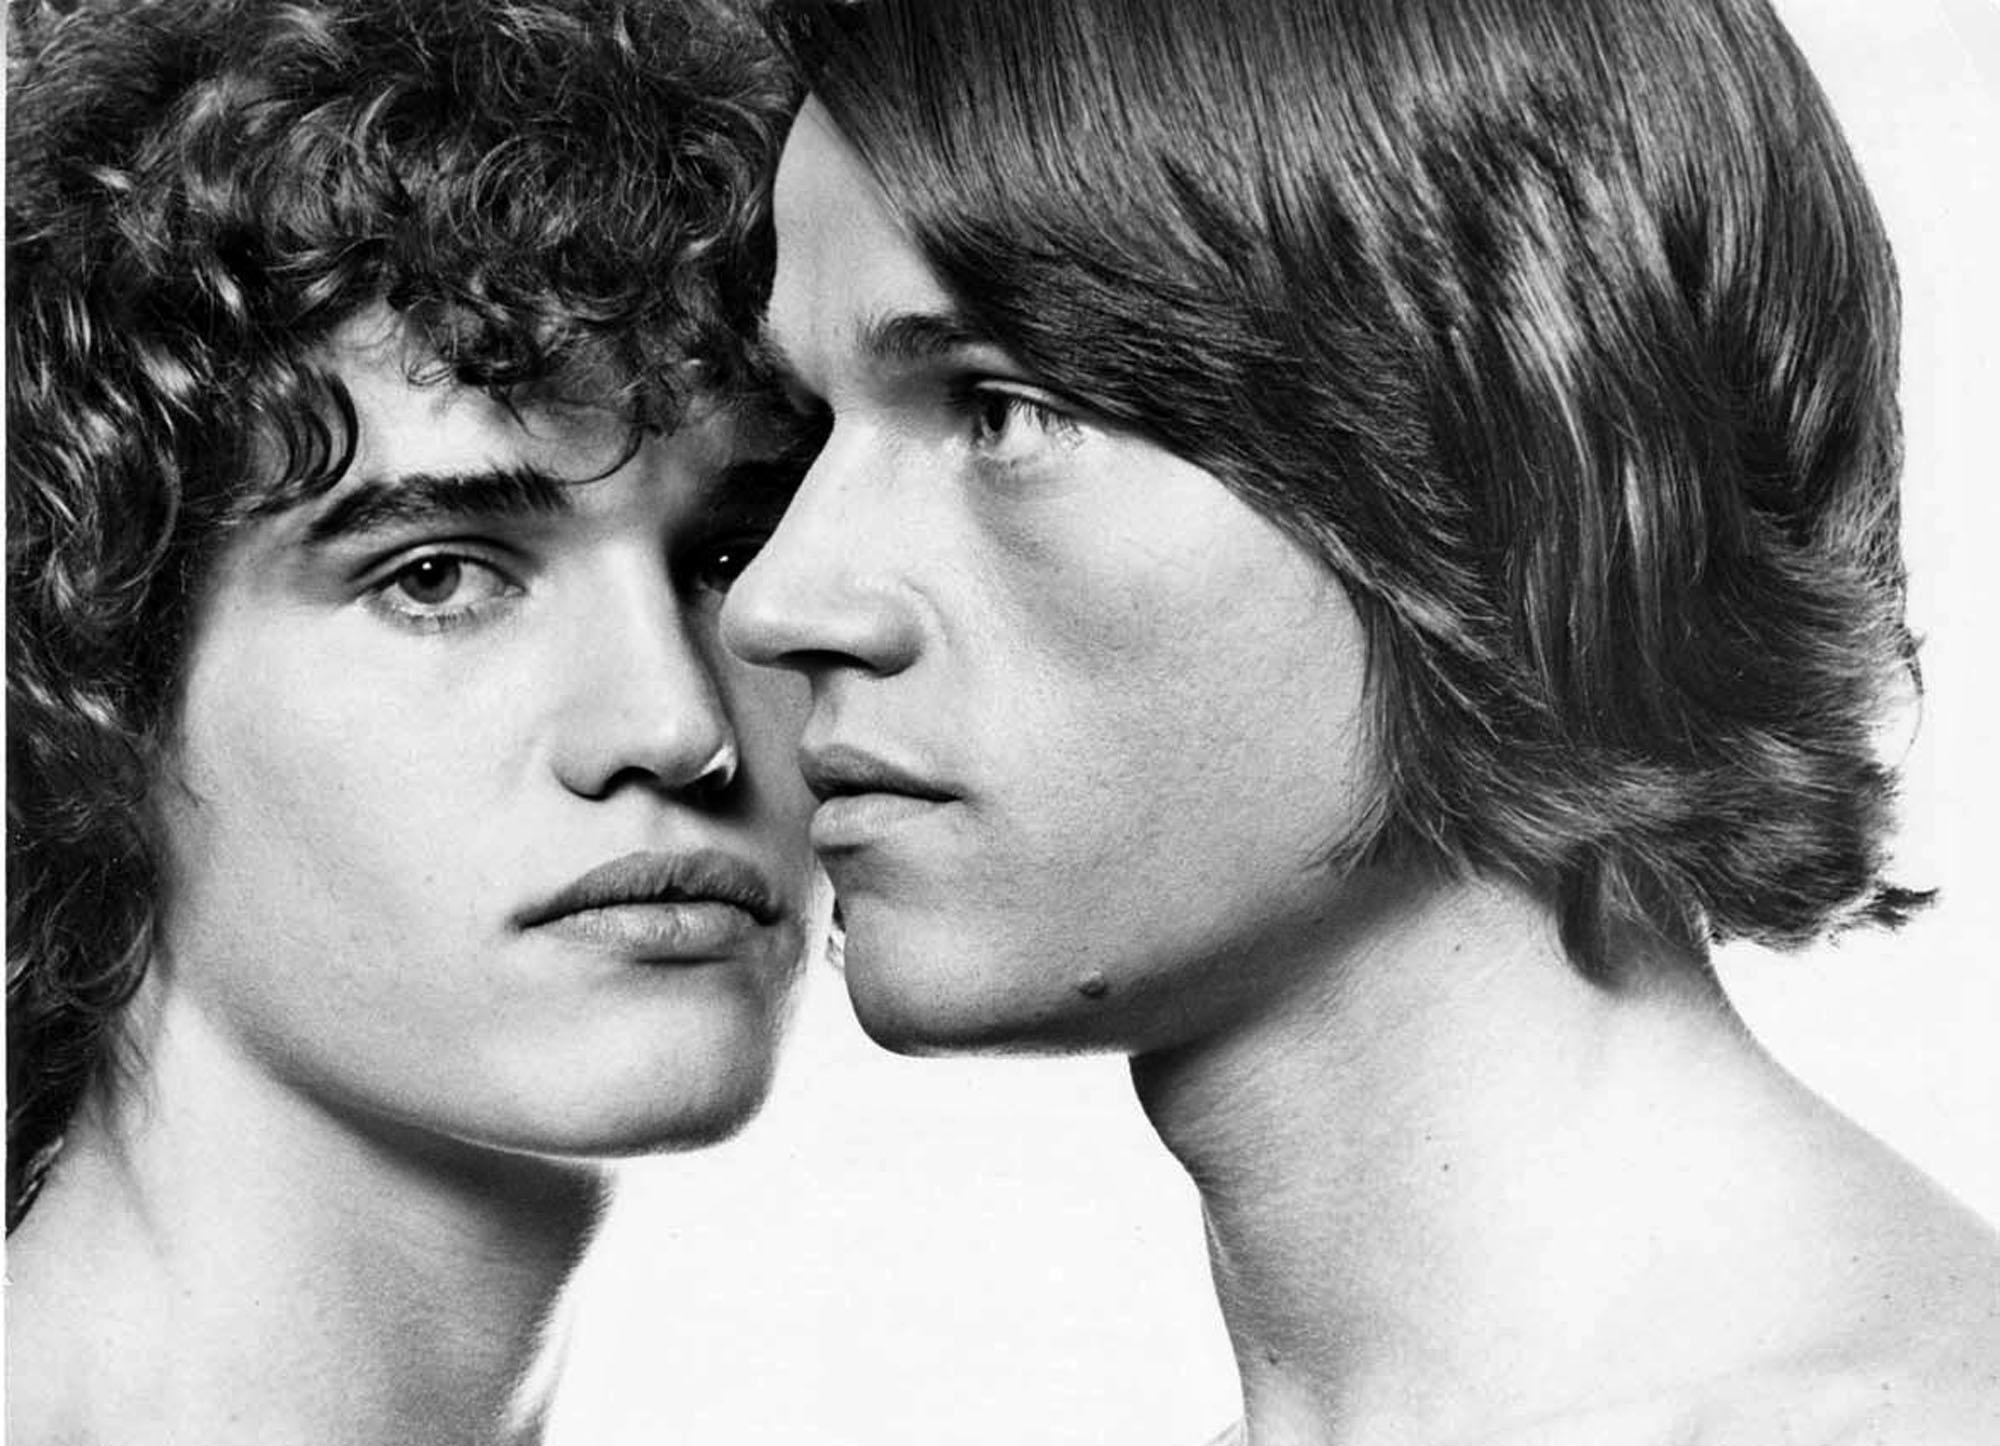  Warhol Superstar Twins Jay and Jed Johnson photographed for After Dark Magazine - Photograph by Jack Mitchell